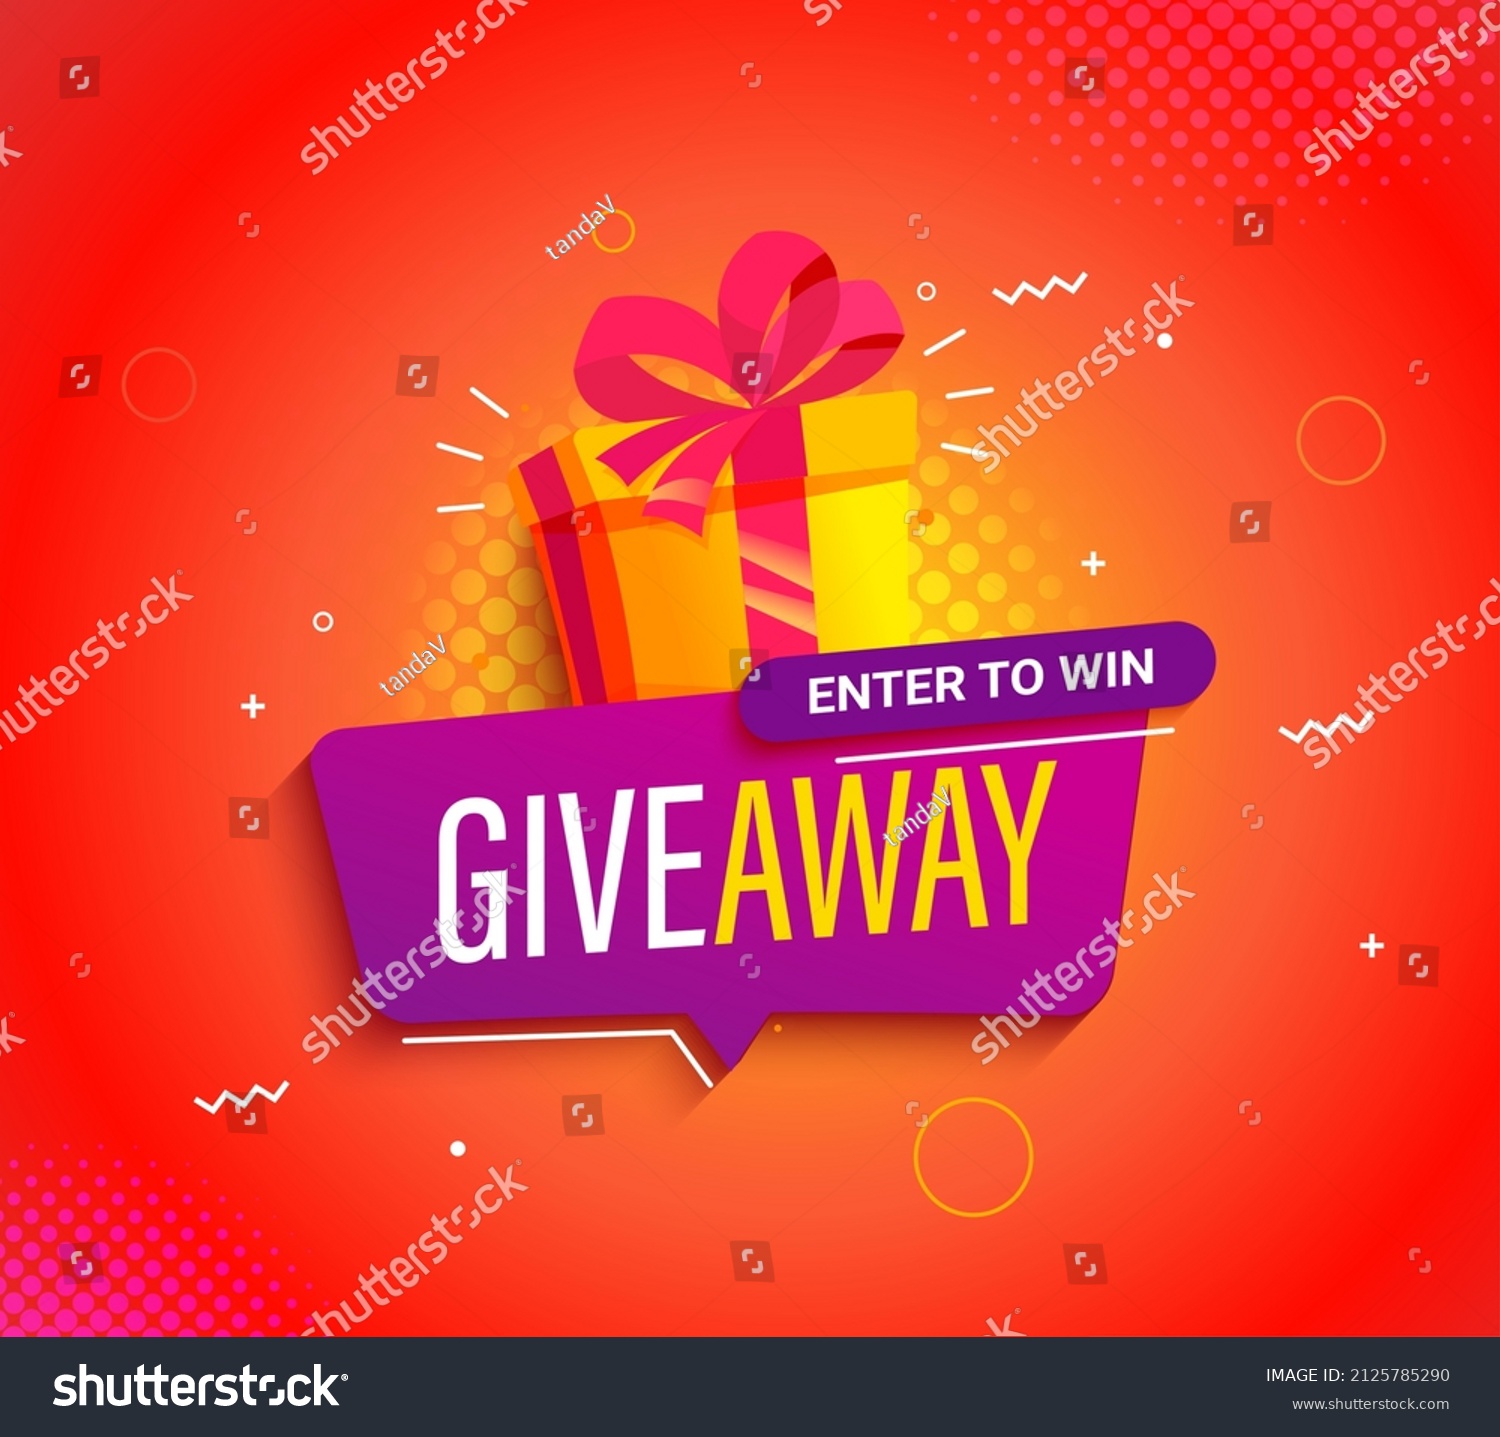 Giveaway bright banner,invitation to victory.Enter to win,welcome poster with gift box with prize to winner.Template design for social media posts,web.Offer reward in contest,vector illustration. #2125785290